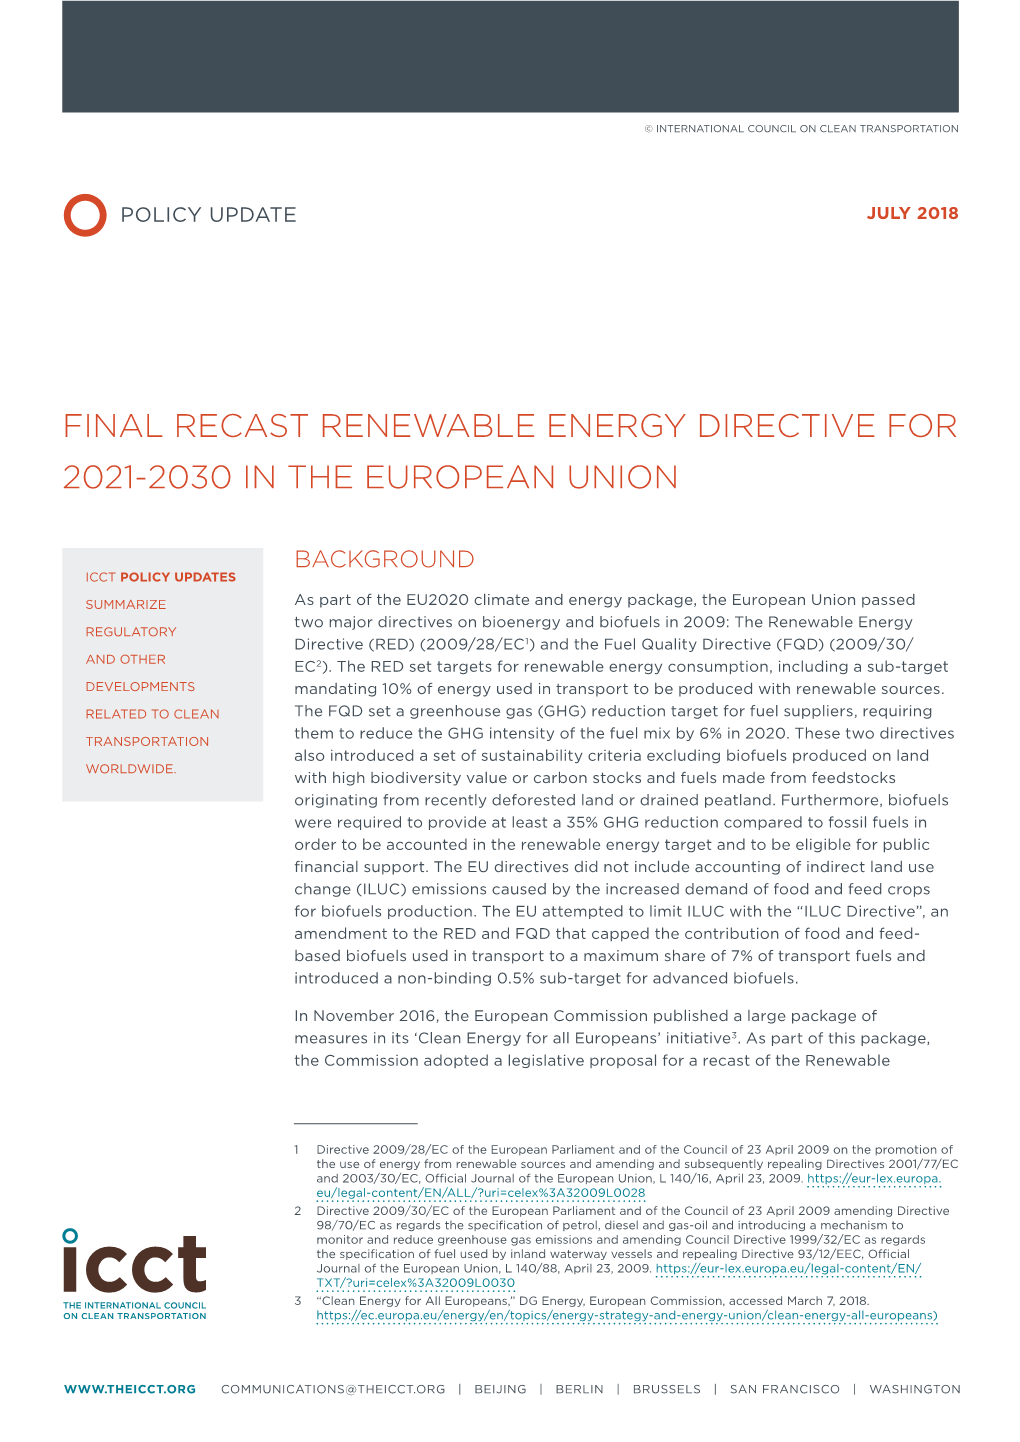 Final Recast Renewable Energy Directive for 2021-2030 in the European Union